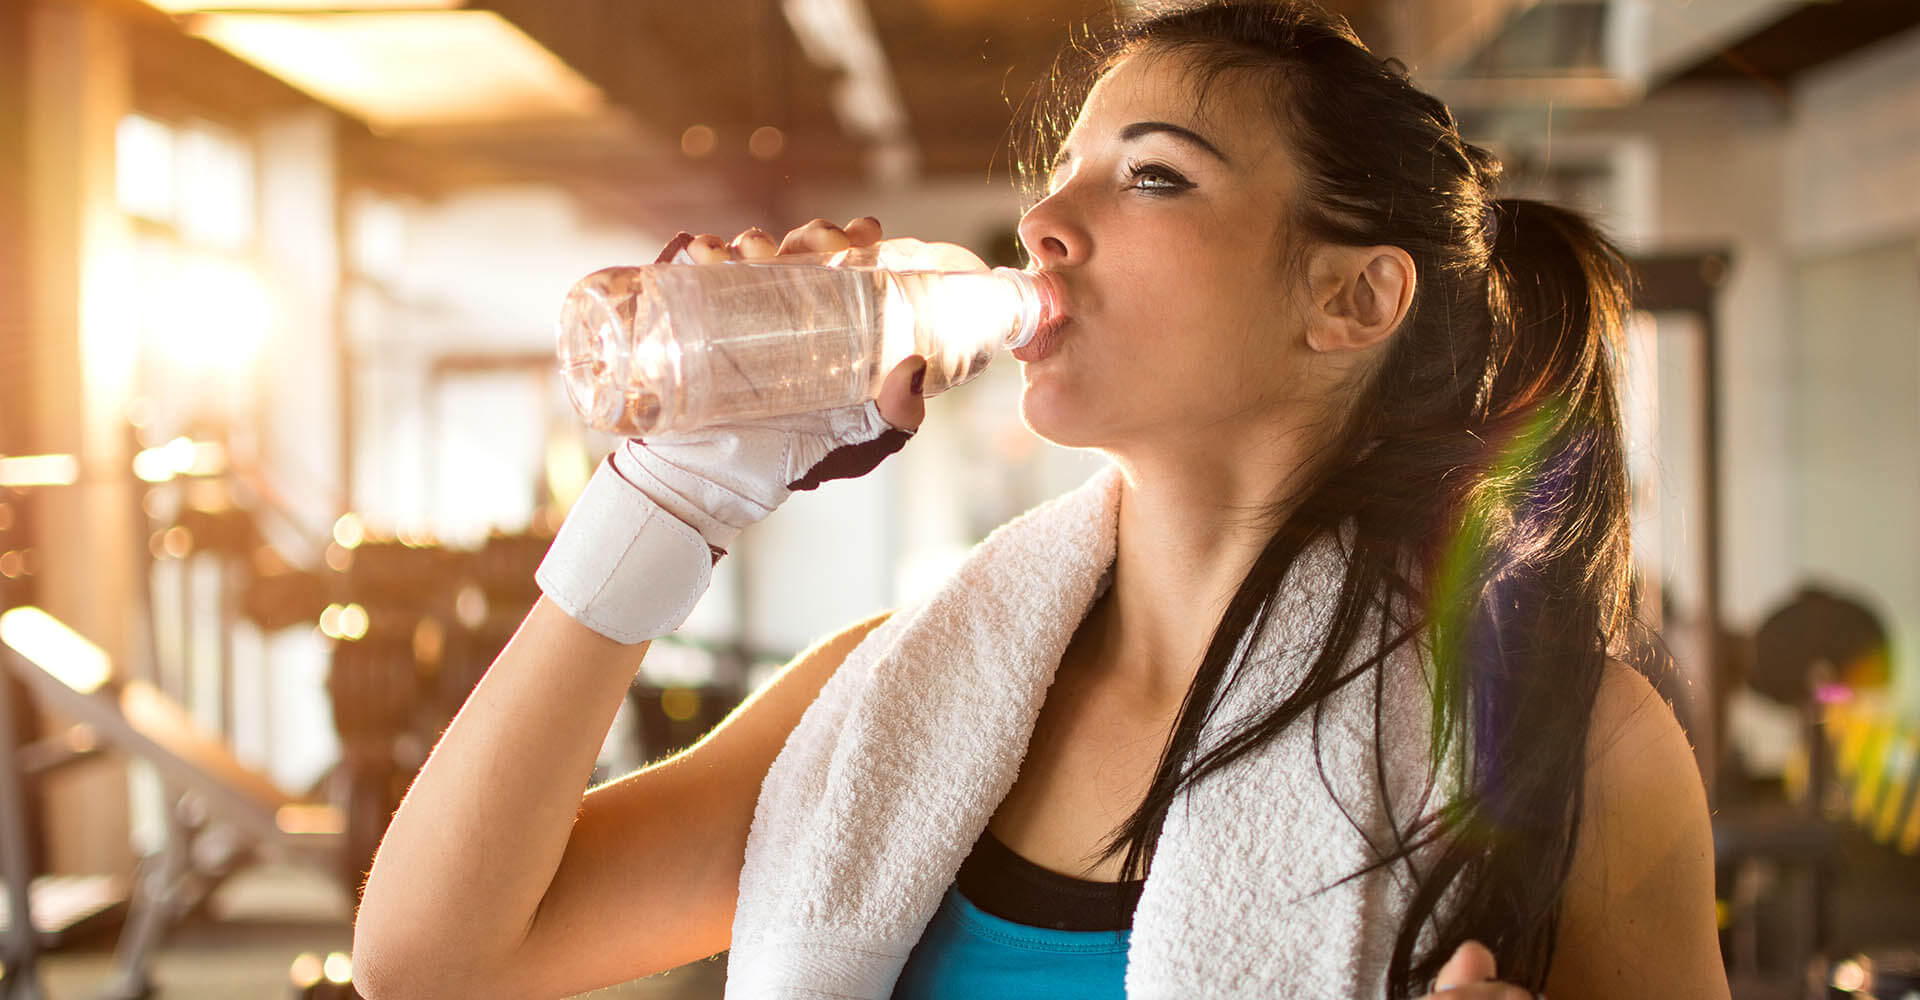 Woman drinks water during training